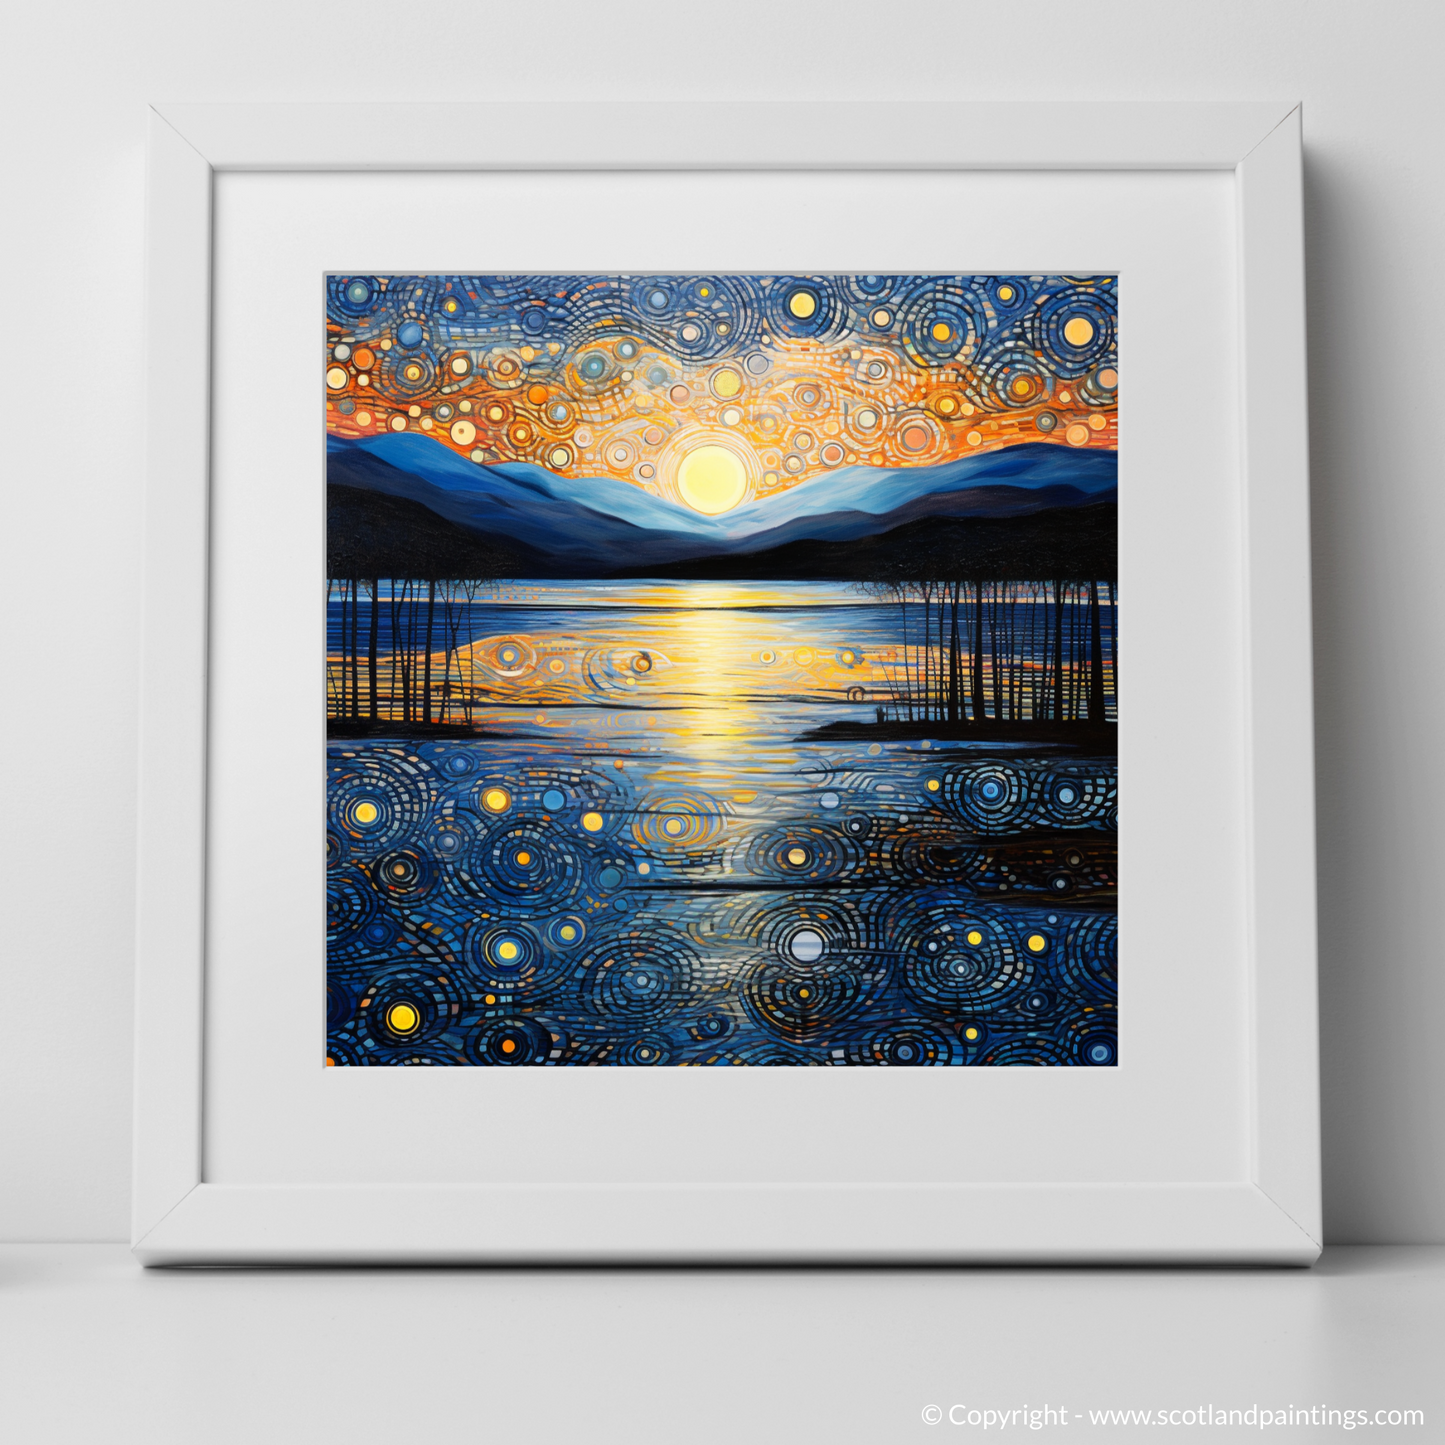 Art Print of Twilight reflections on Loch Lomond with a white frame